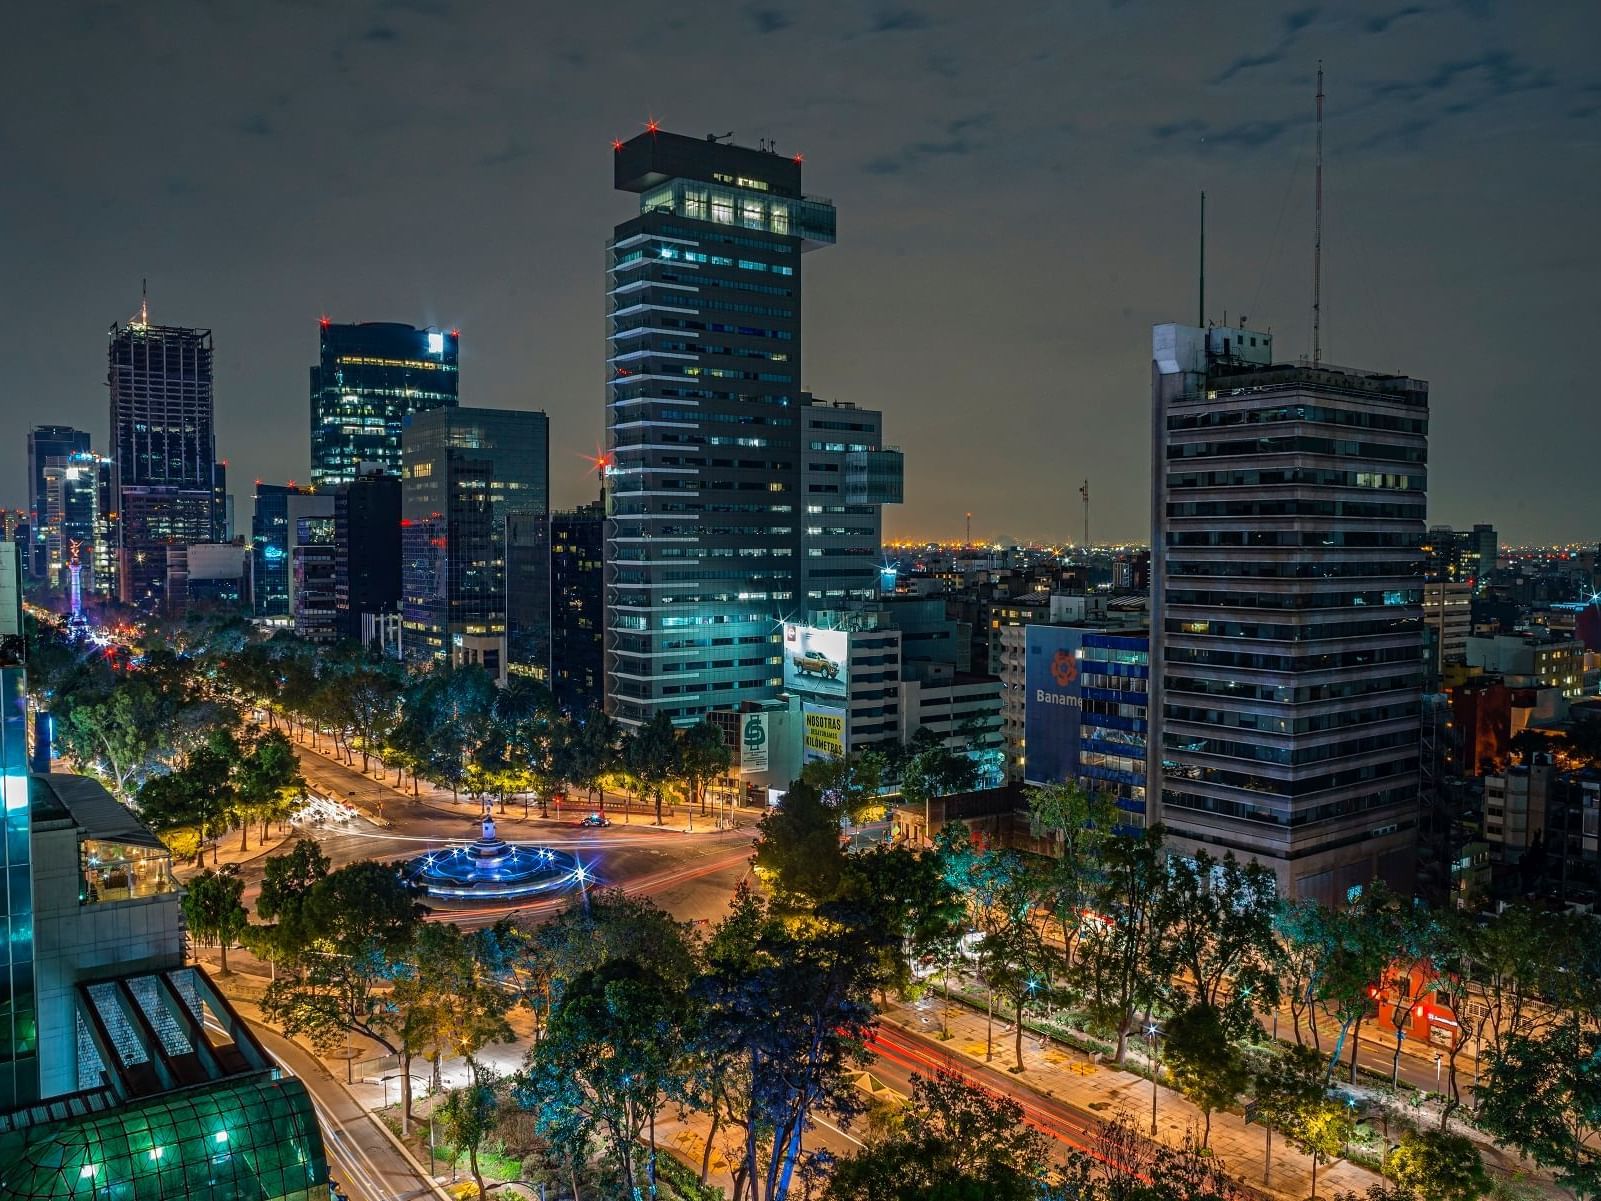 An Aerial view of the city at night near Marquis Reforma